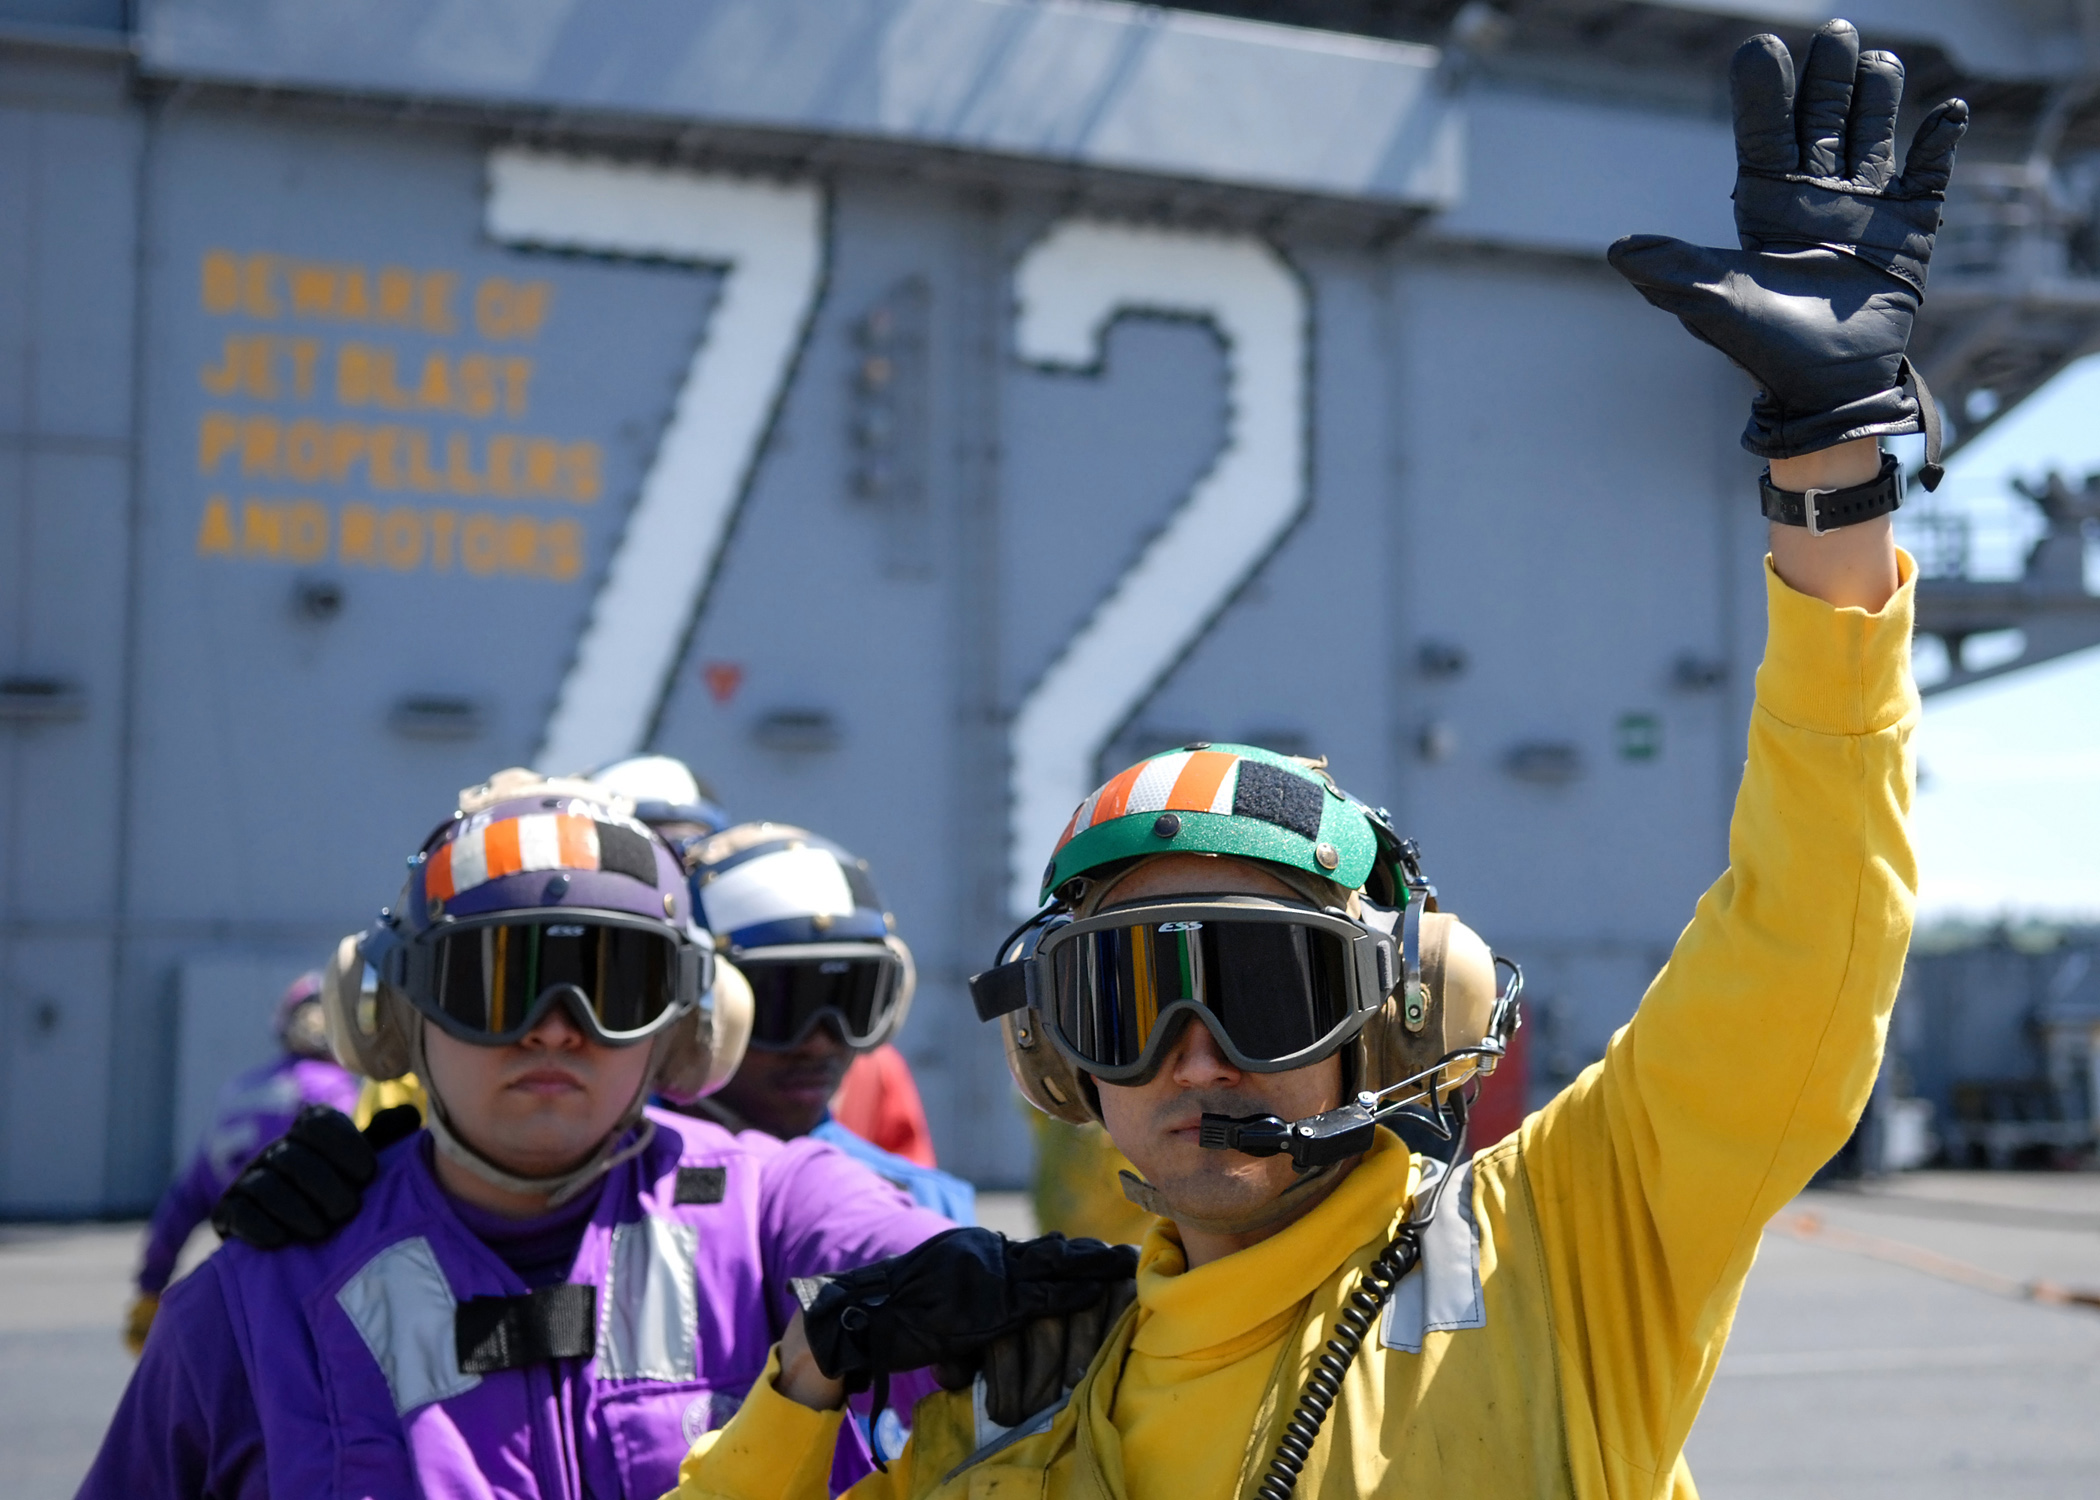 US Navy 070508-N-7981E-152 Flight deck personnel stand ready to fight a fire during a simulated crash scenario on the flight deck of Nimitz-class aircraft carrier USS Abraham Lincoln (CVN 72)